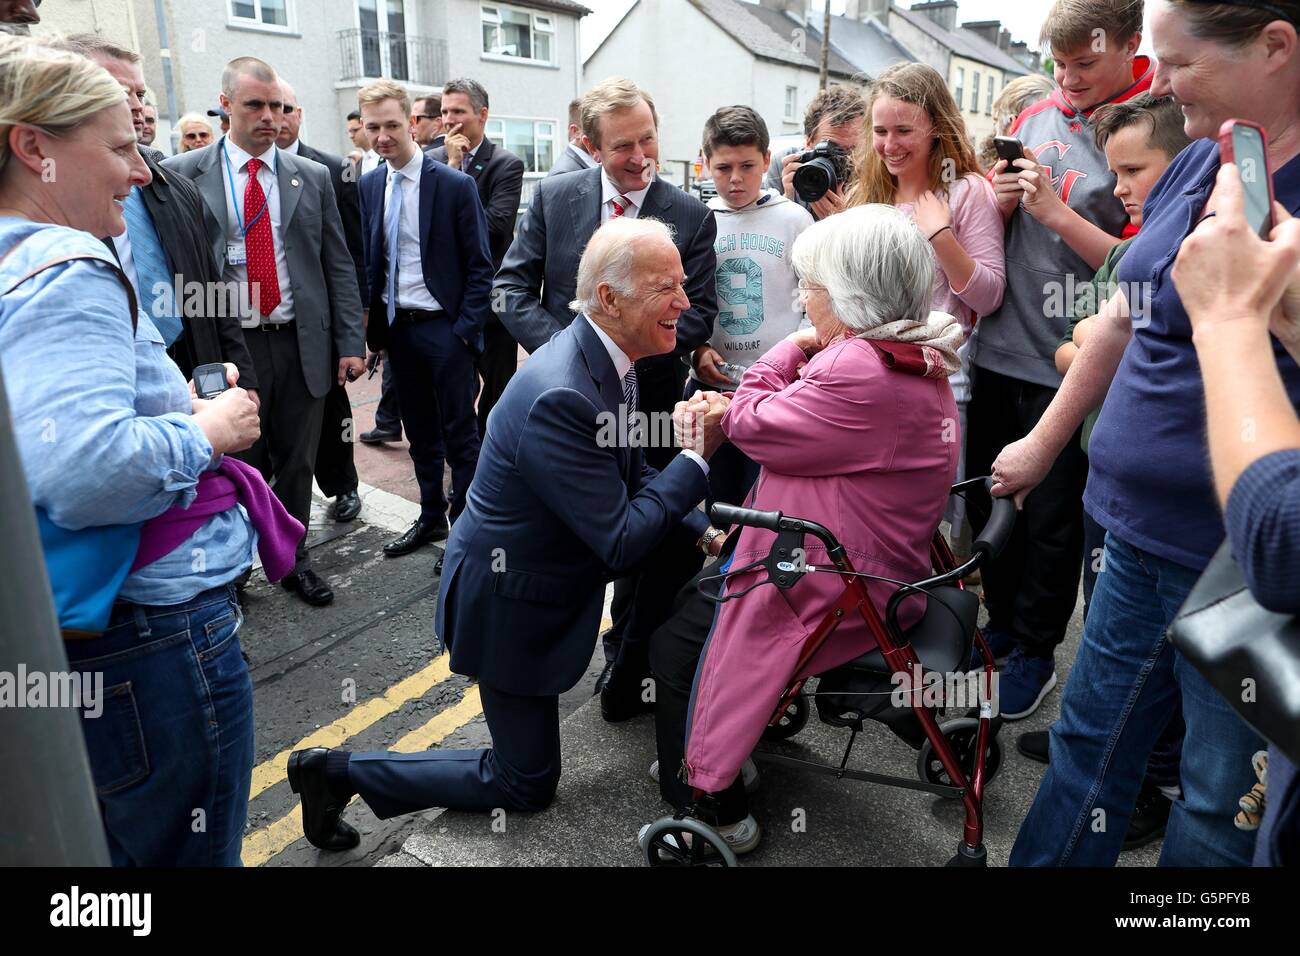 U.S. Vice President Joe Biden greets Mona Curry, 92, the oldest resident during a visit to his ancestral home June 22, 2016 in Ballina, County Mayo, Ireland. Stock Photo